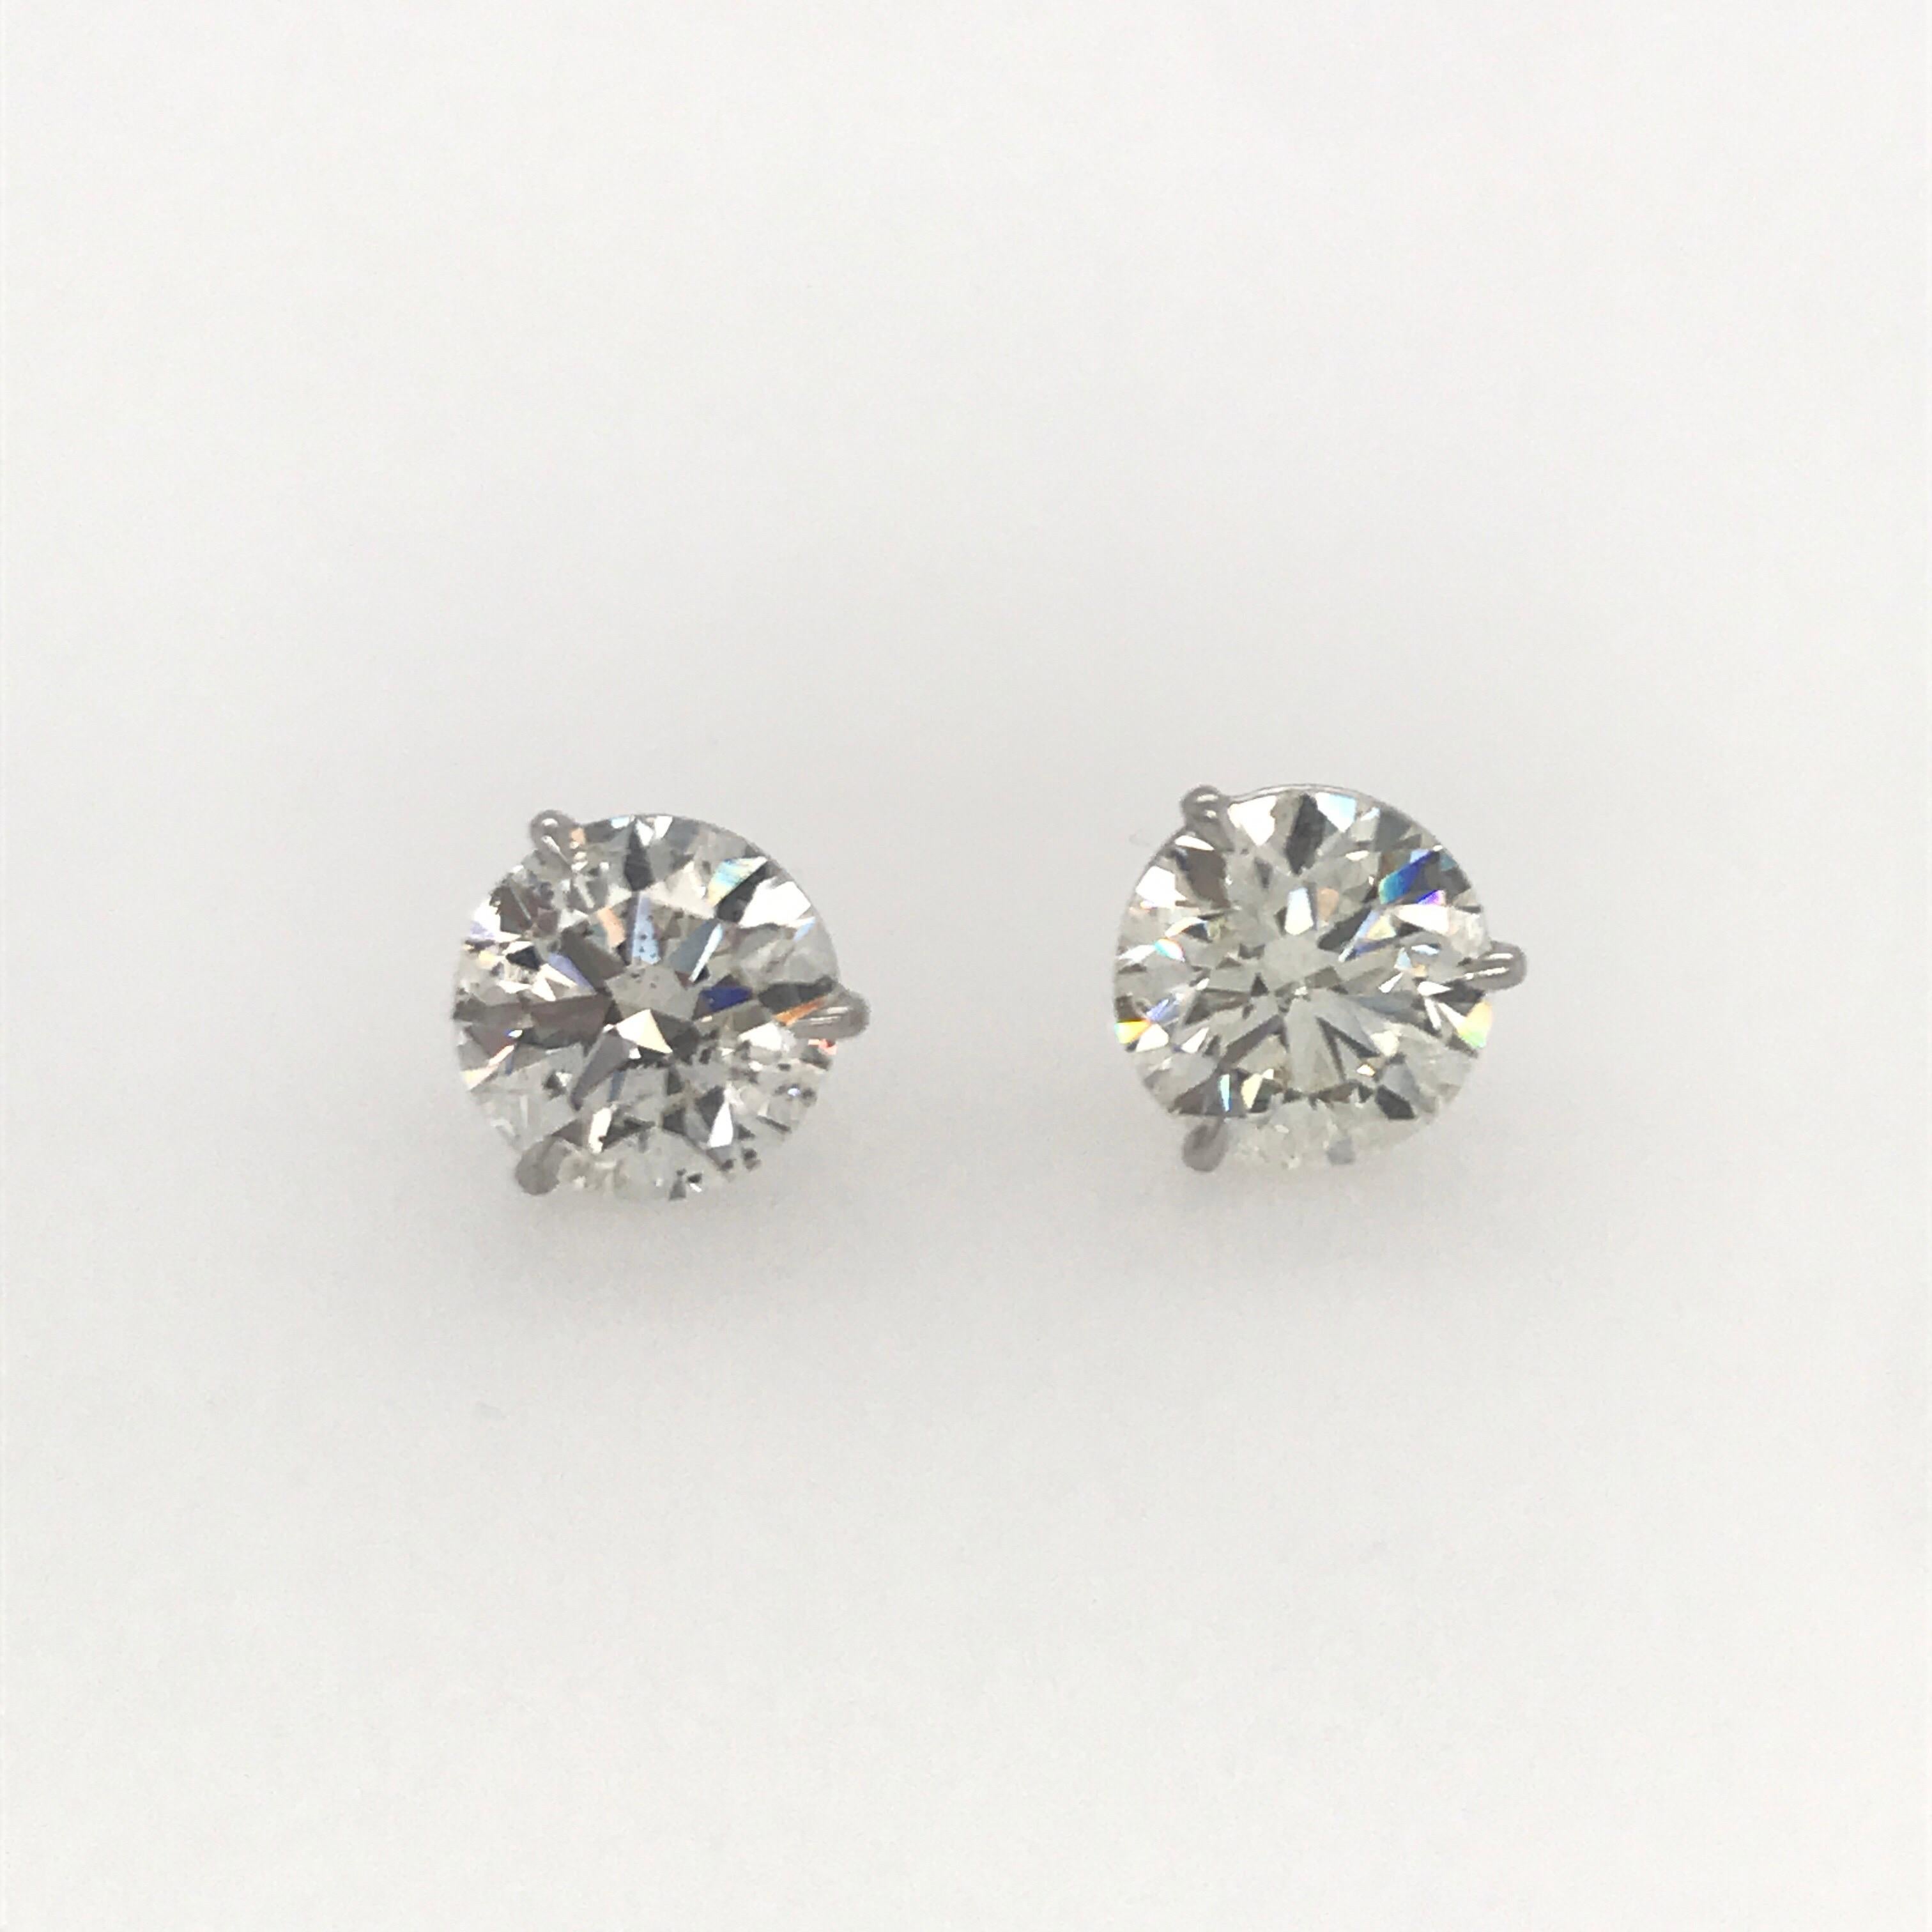 Diamond stud earrings weighing 4.81 carats in a 3 prong champagne setting.
Color I-J
Clarity I1